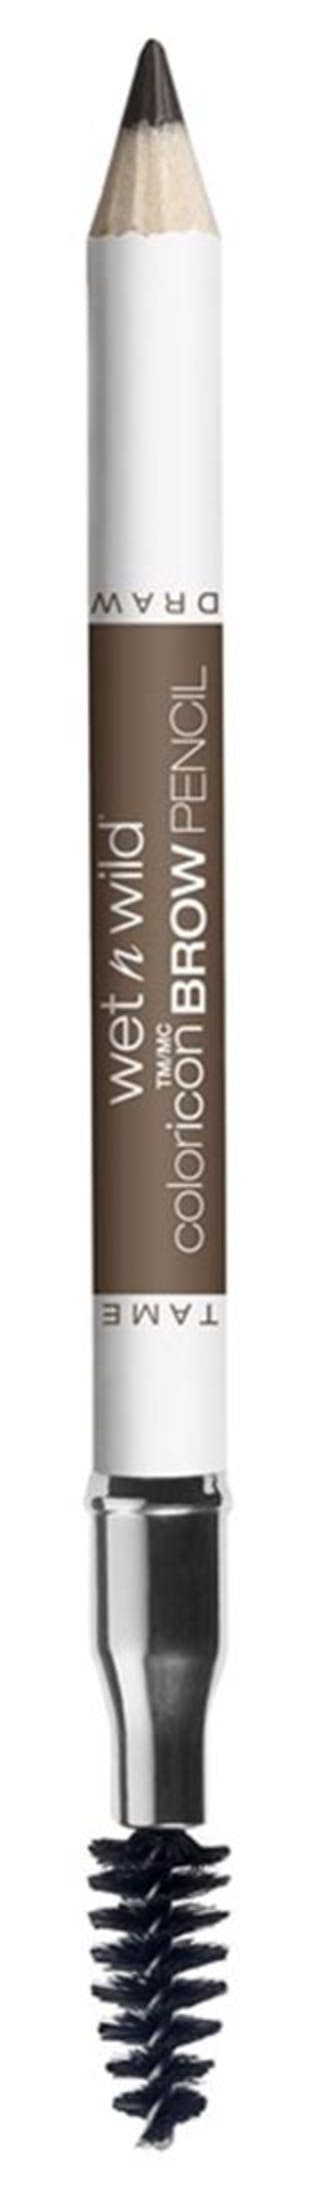 wetnwild wet n wild coloricon Brow Pencil 0.7g (Various Shades) - Brunettes do it Better